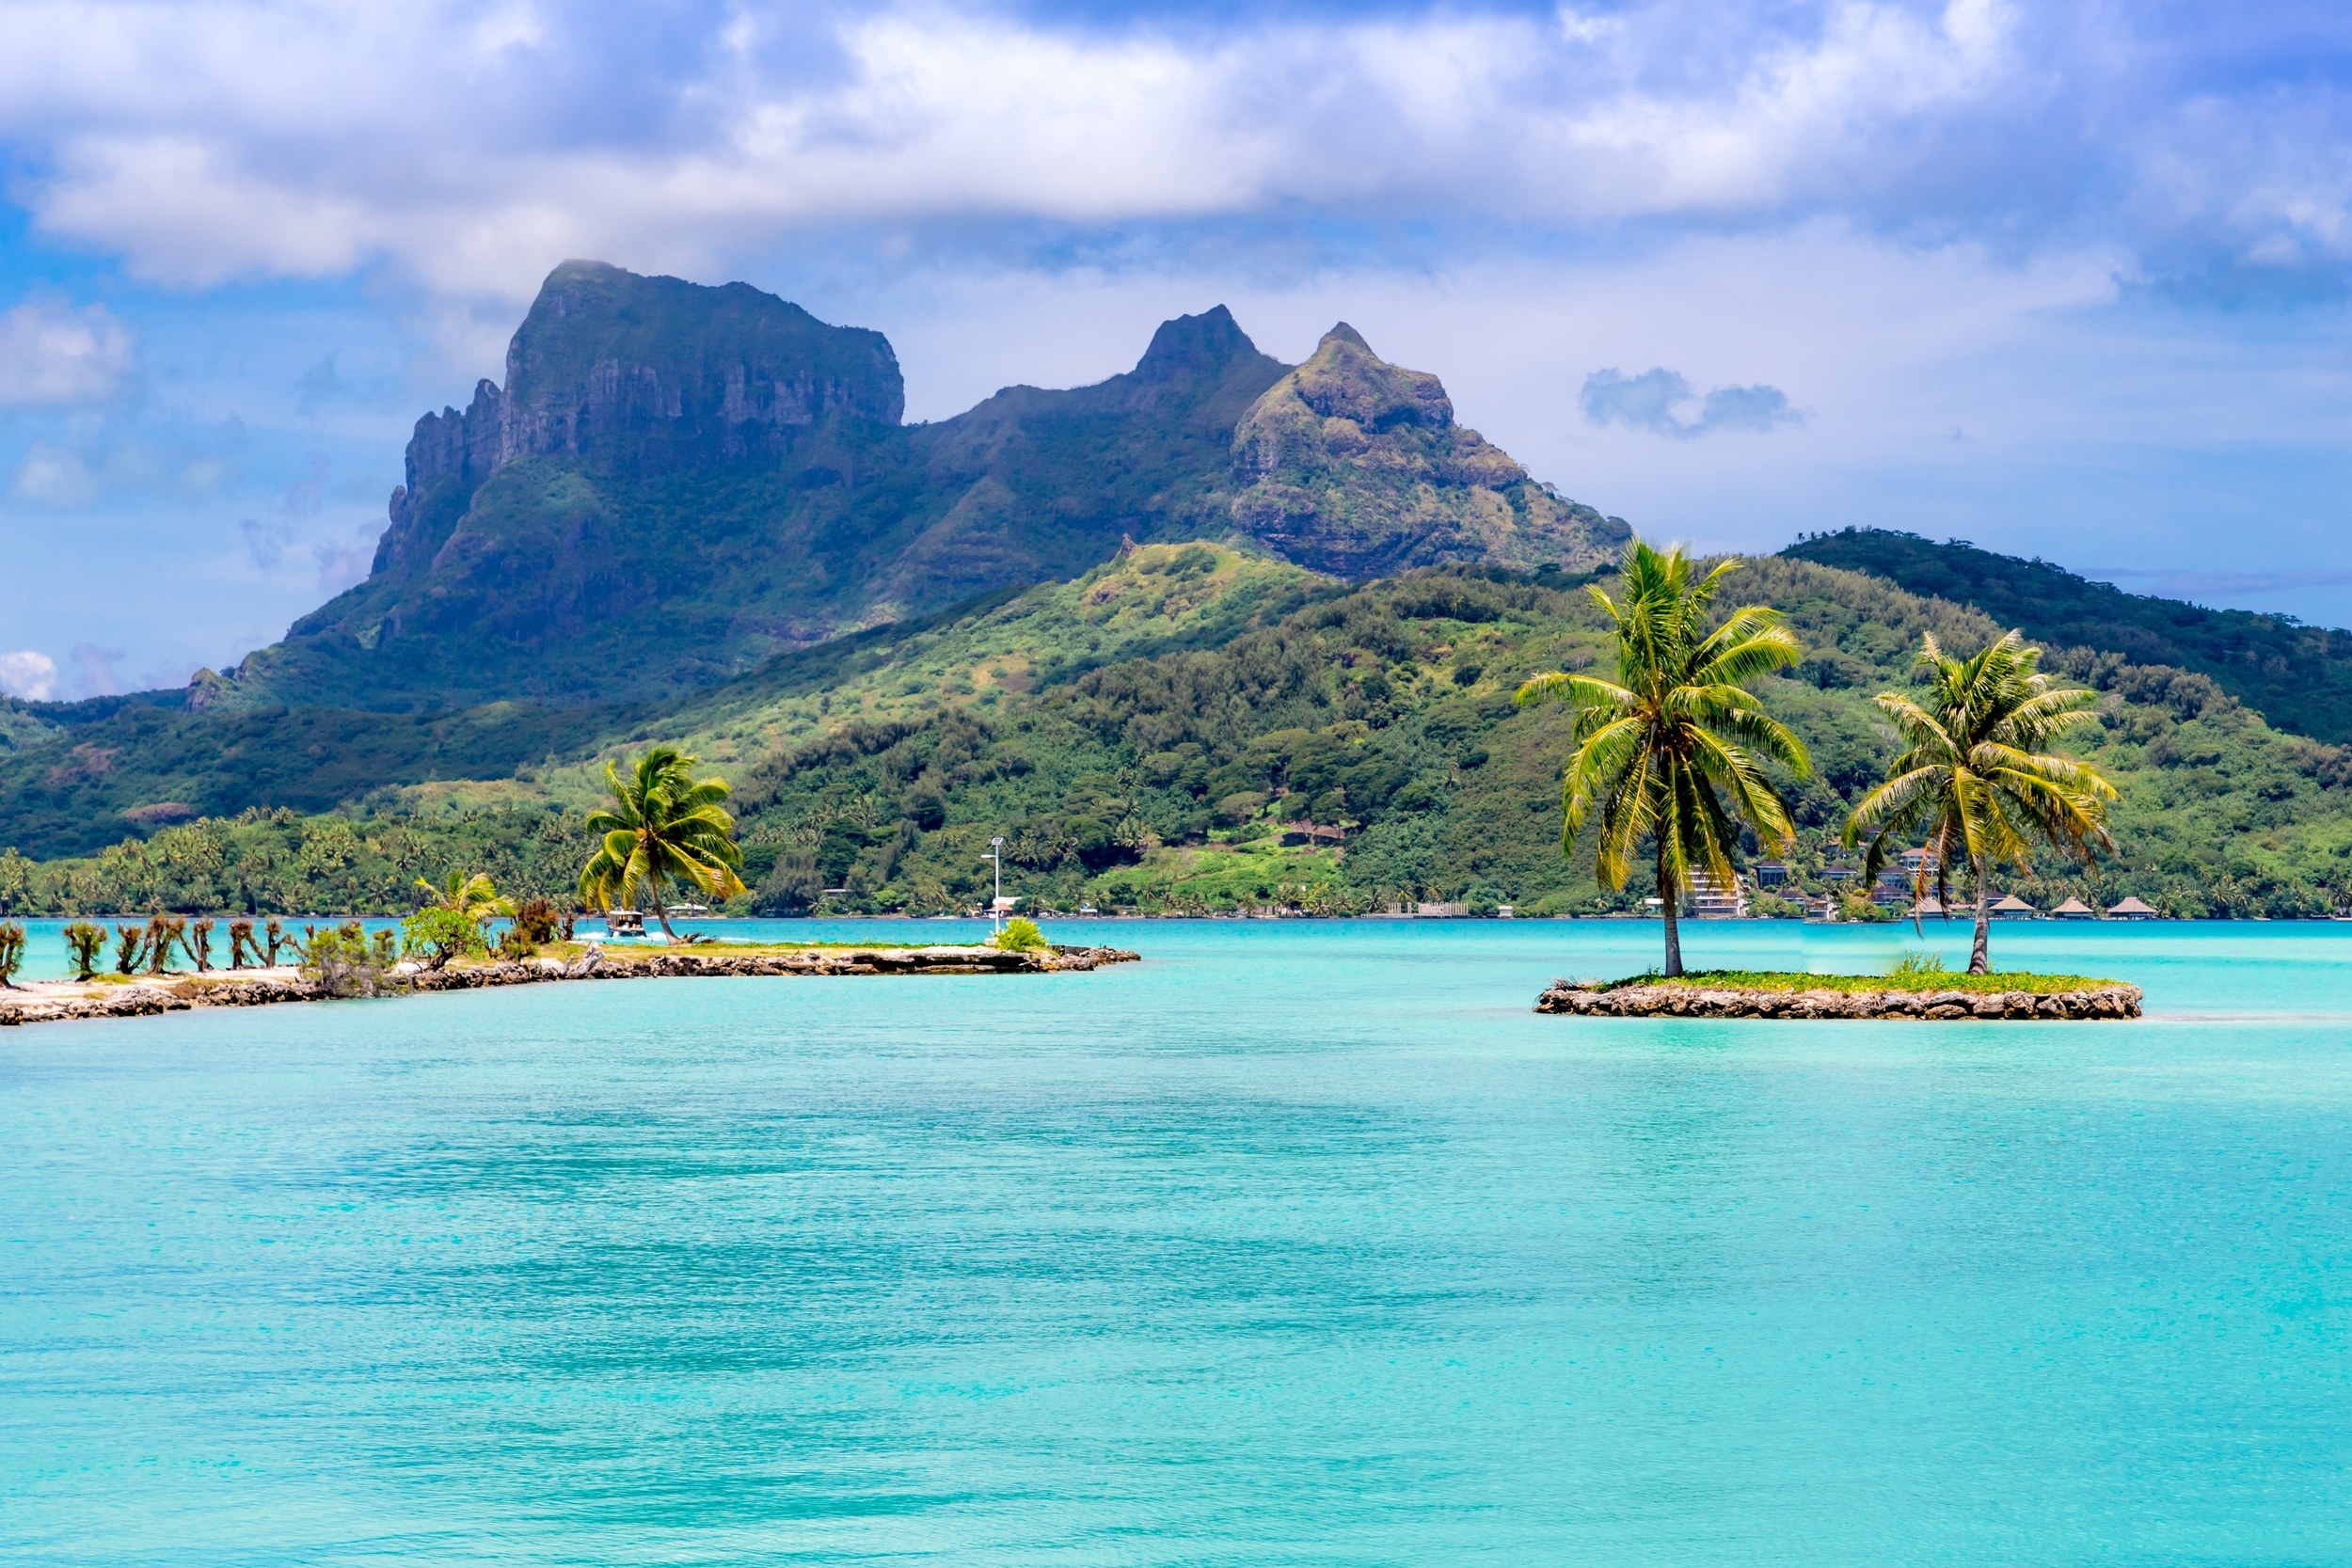 <p>For United States travelers, getting to Bora Bora is a major undertaking. It requires multiple long plane trips and is very expensive. But those who’ve visited have said it was one of the best trips of their life. </p><p>You may also like: <a href='https://www.yardbarker.com/lifestyle/articles/20_tips_to_keep_your_teeth_pearly_white/s1__40500648'>20 tips to keep your teeth pearly white</a></p>